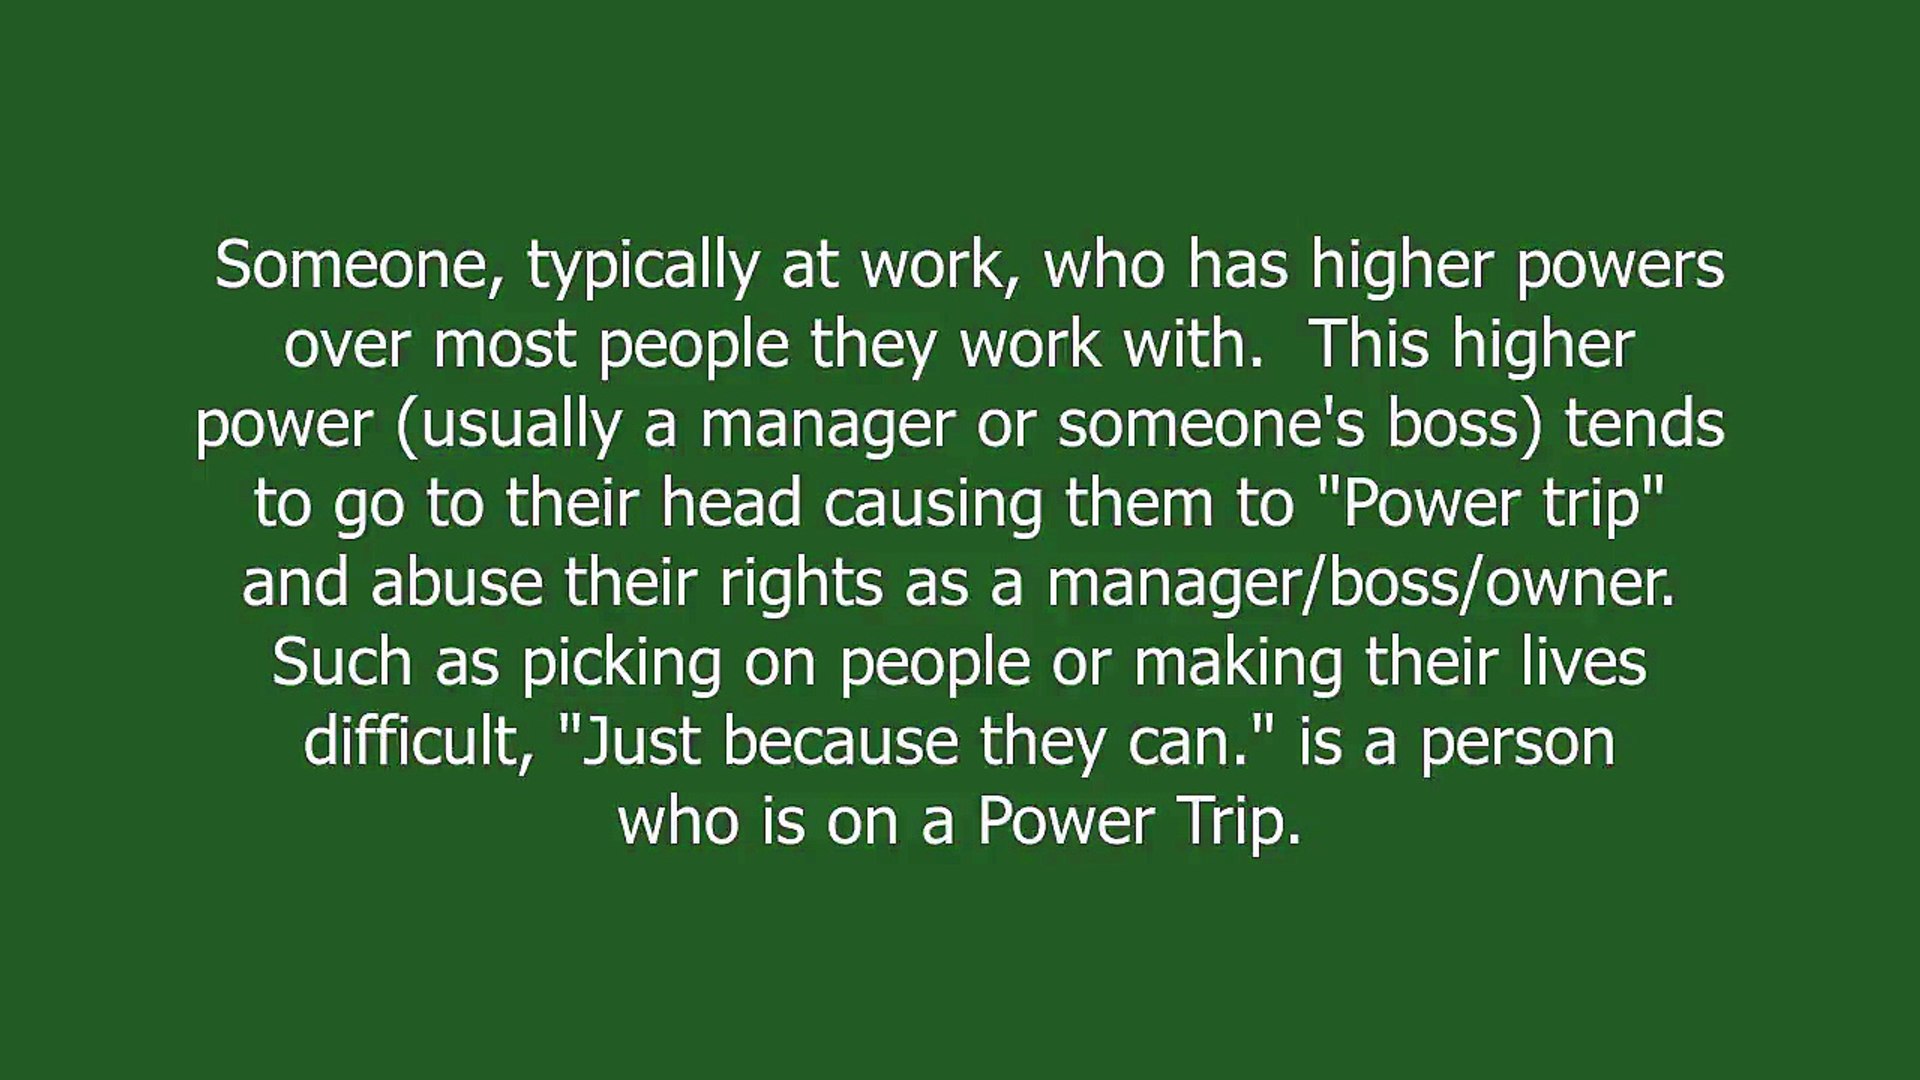 power trip meaning and pronunciation - video Dailymotion